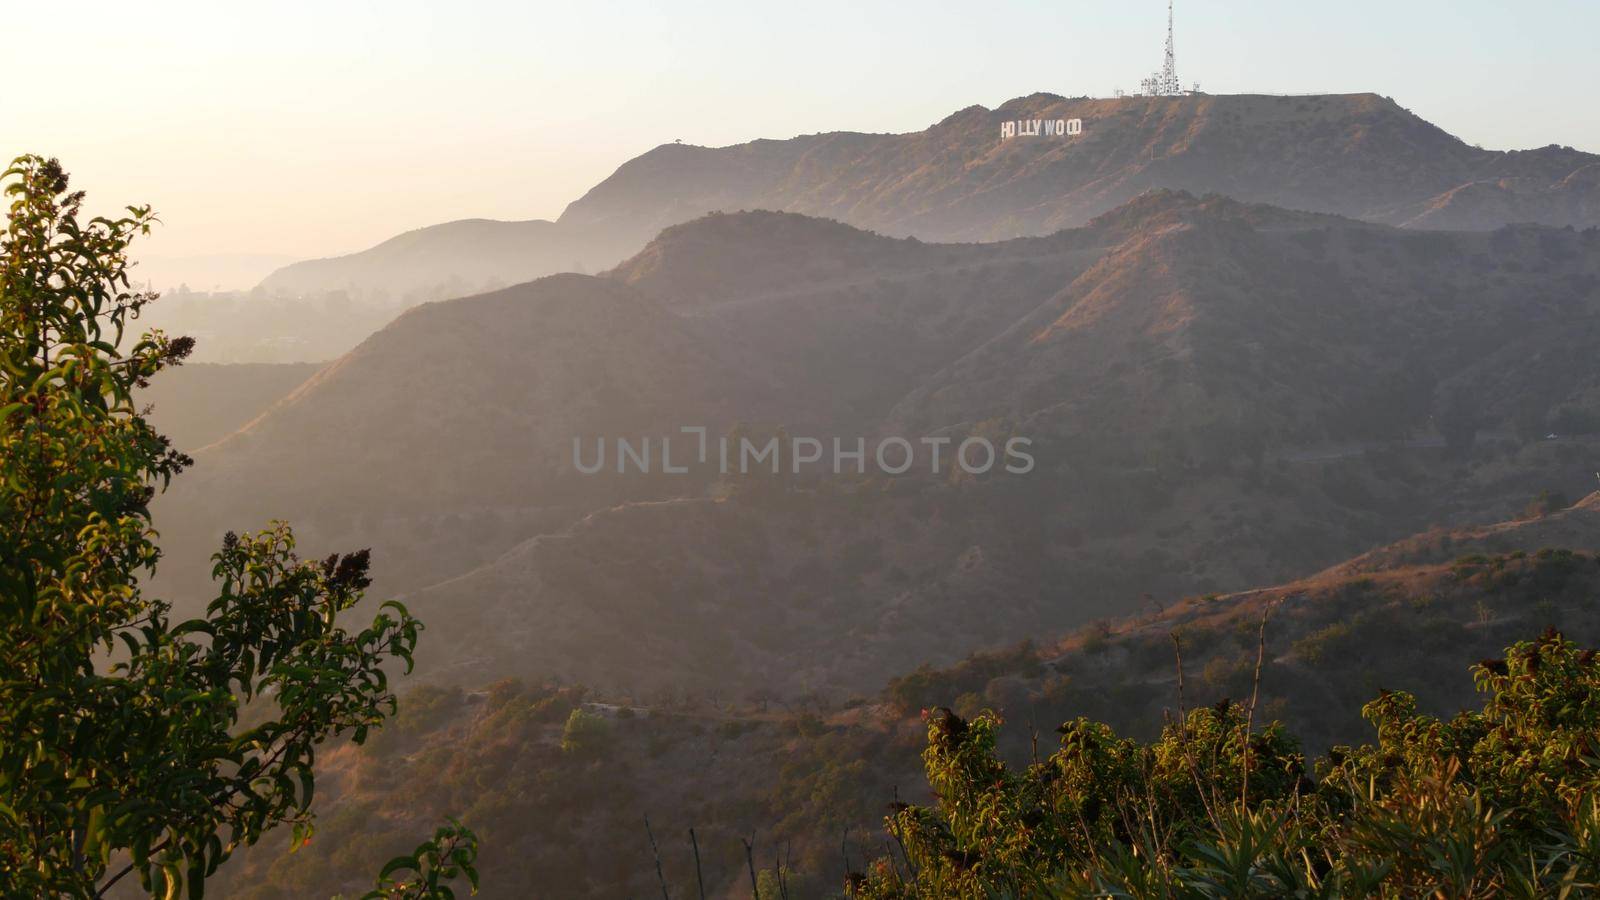 LOS ANGELES, CALIFORNIA, USA - 7 NOV 2019: Iconic Hollywood sign. Big letters on hills as symbol of cinema, movie studios and entertainment industry. Large text on mountain, view thru green leaves.